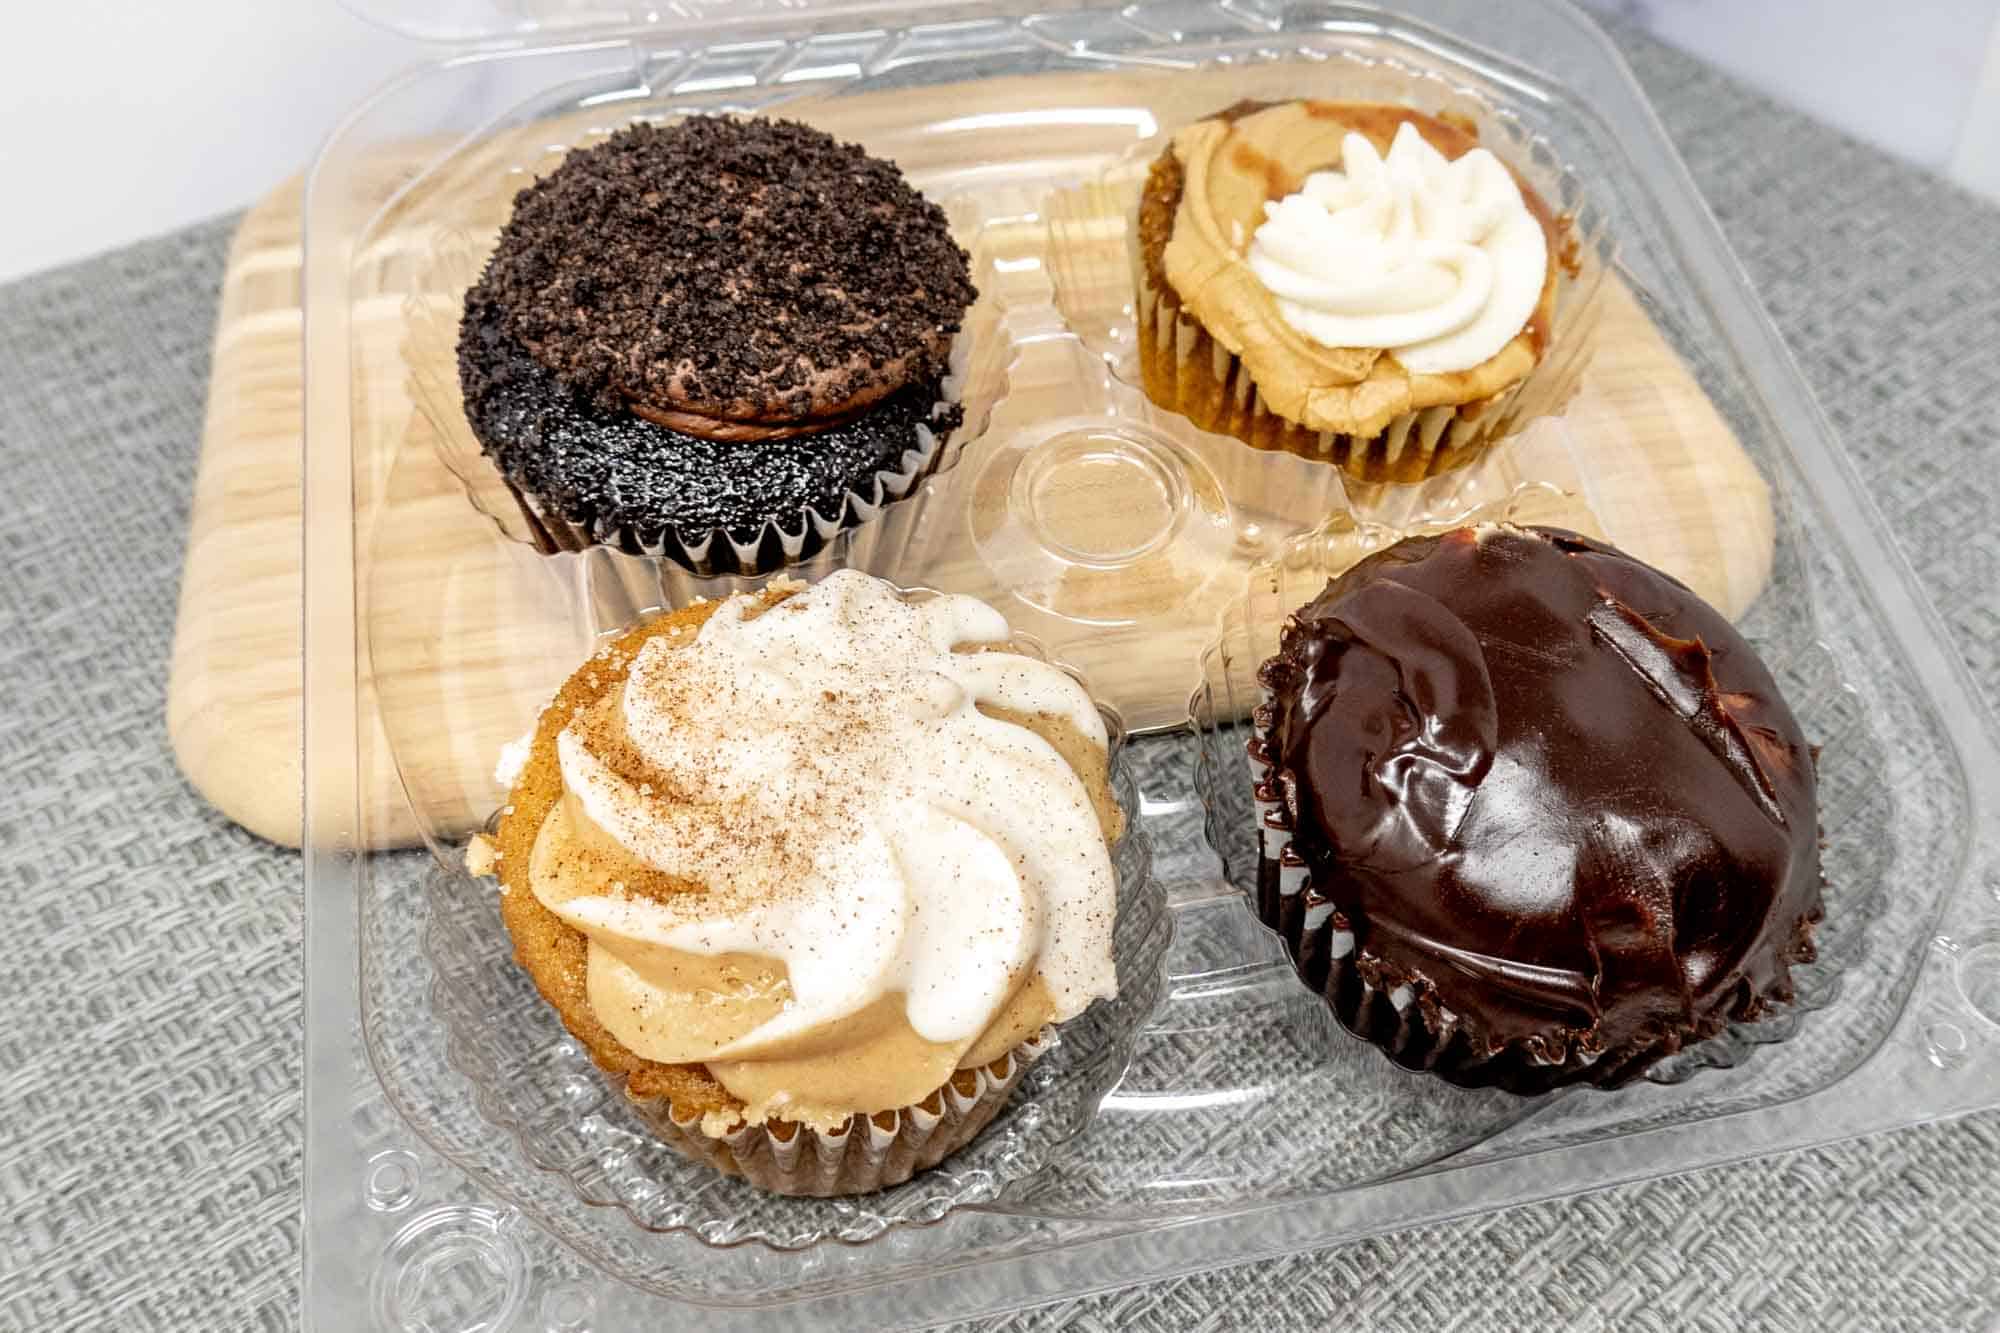 Container with two chocolate and two vanilla cupcakes